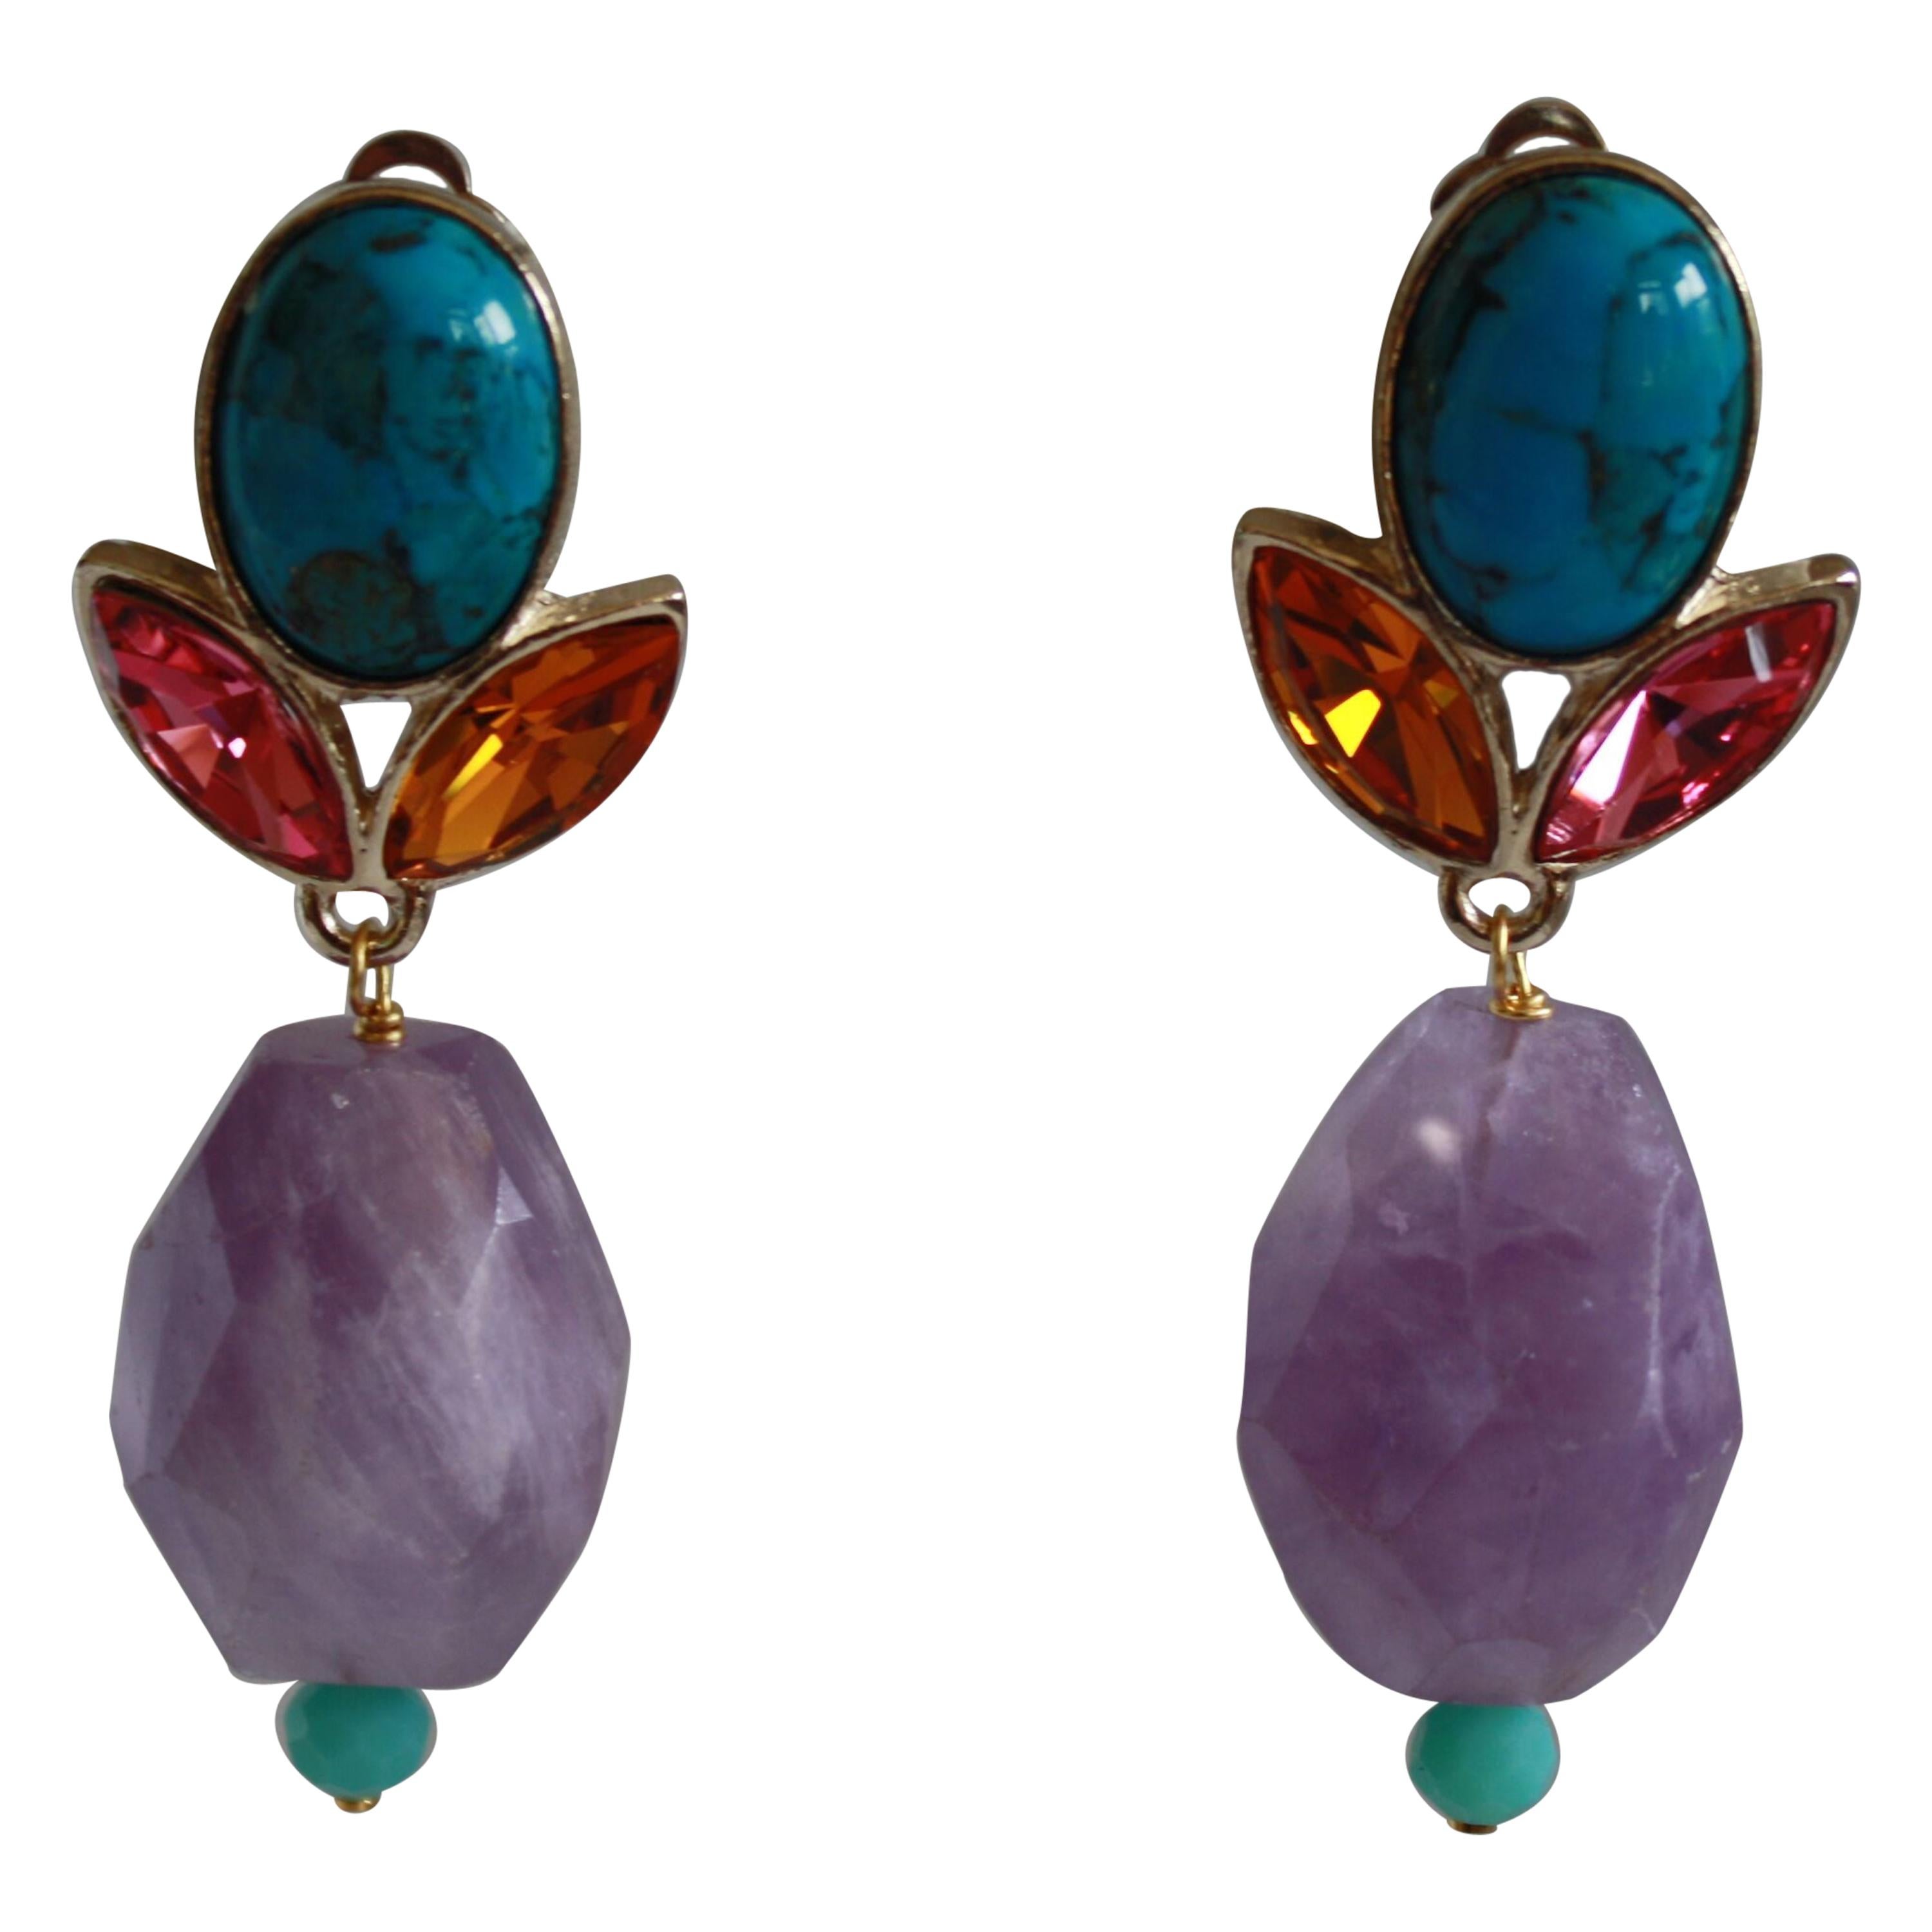 Philippe Ferrandis Amethyst, Turquoise, Glass Cabochon, & Crystal Clip Earrings